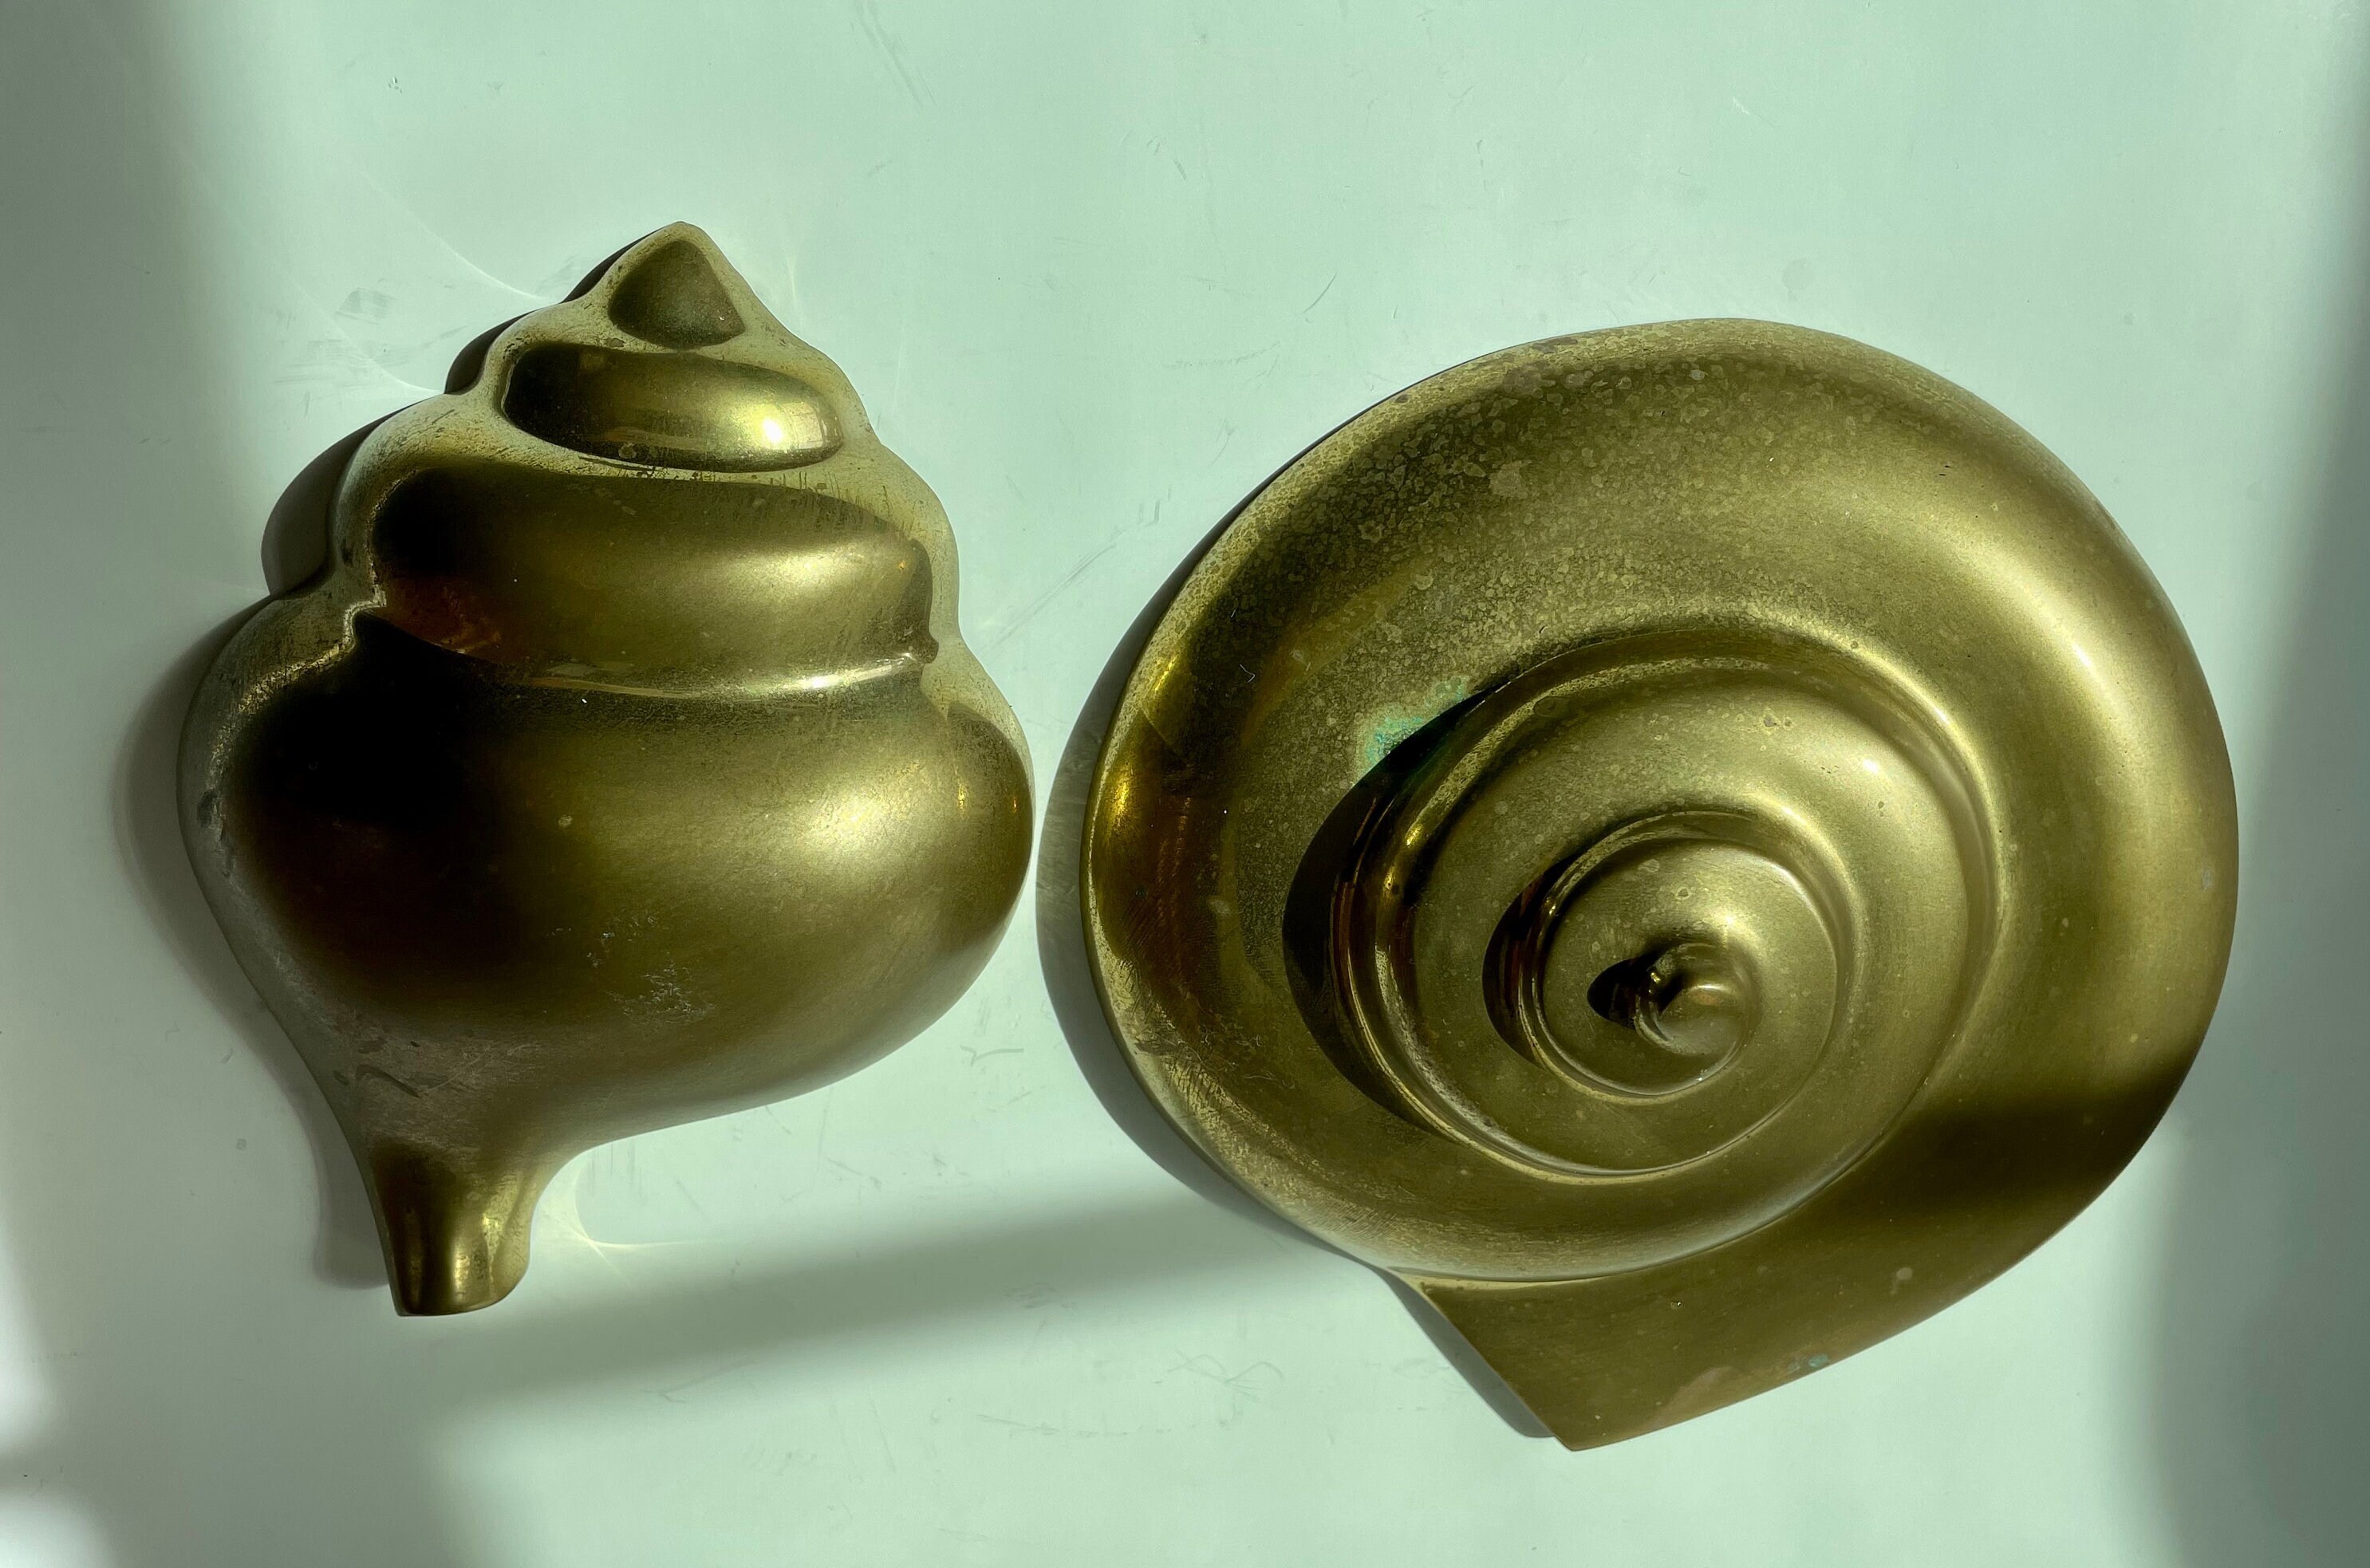 Pair of Vintage Brass Seashell Decor Wall Hanging Snail & Conch